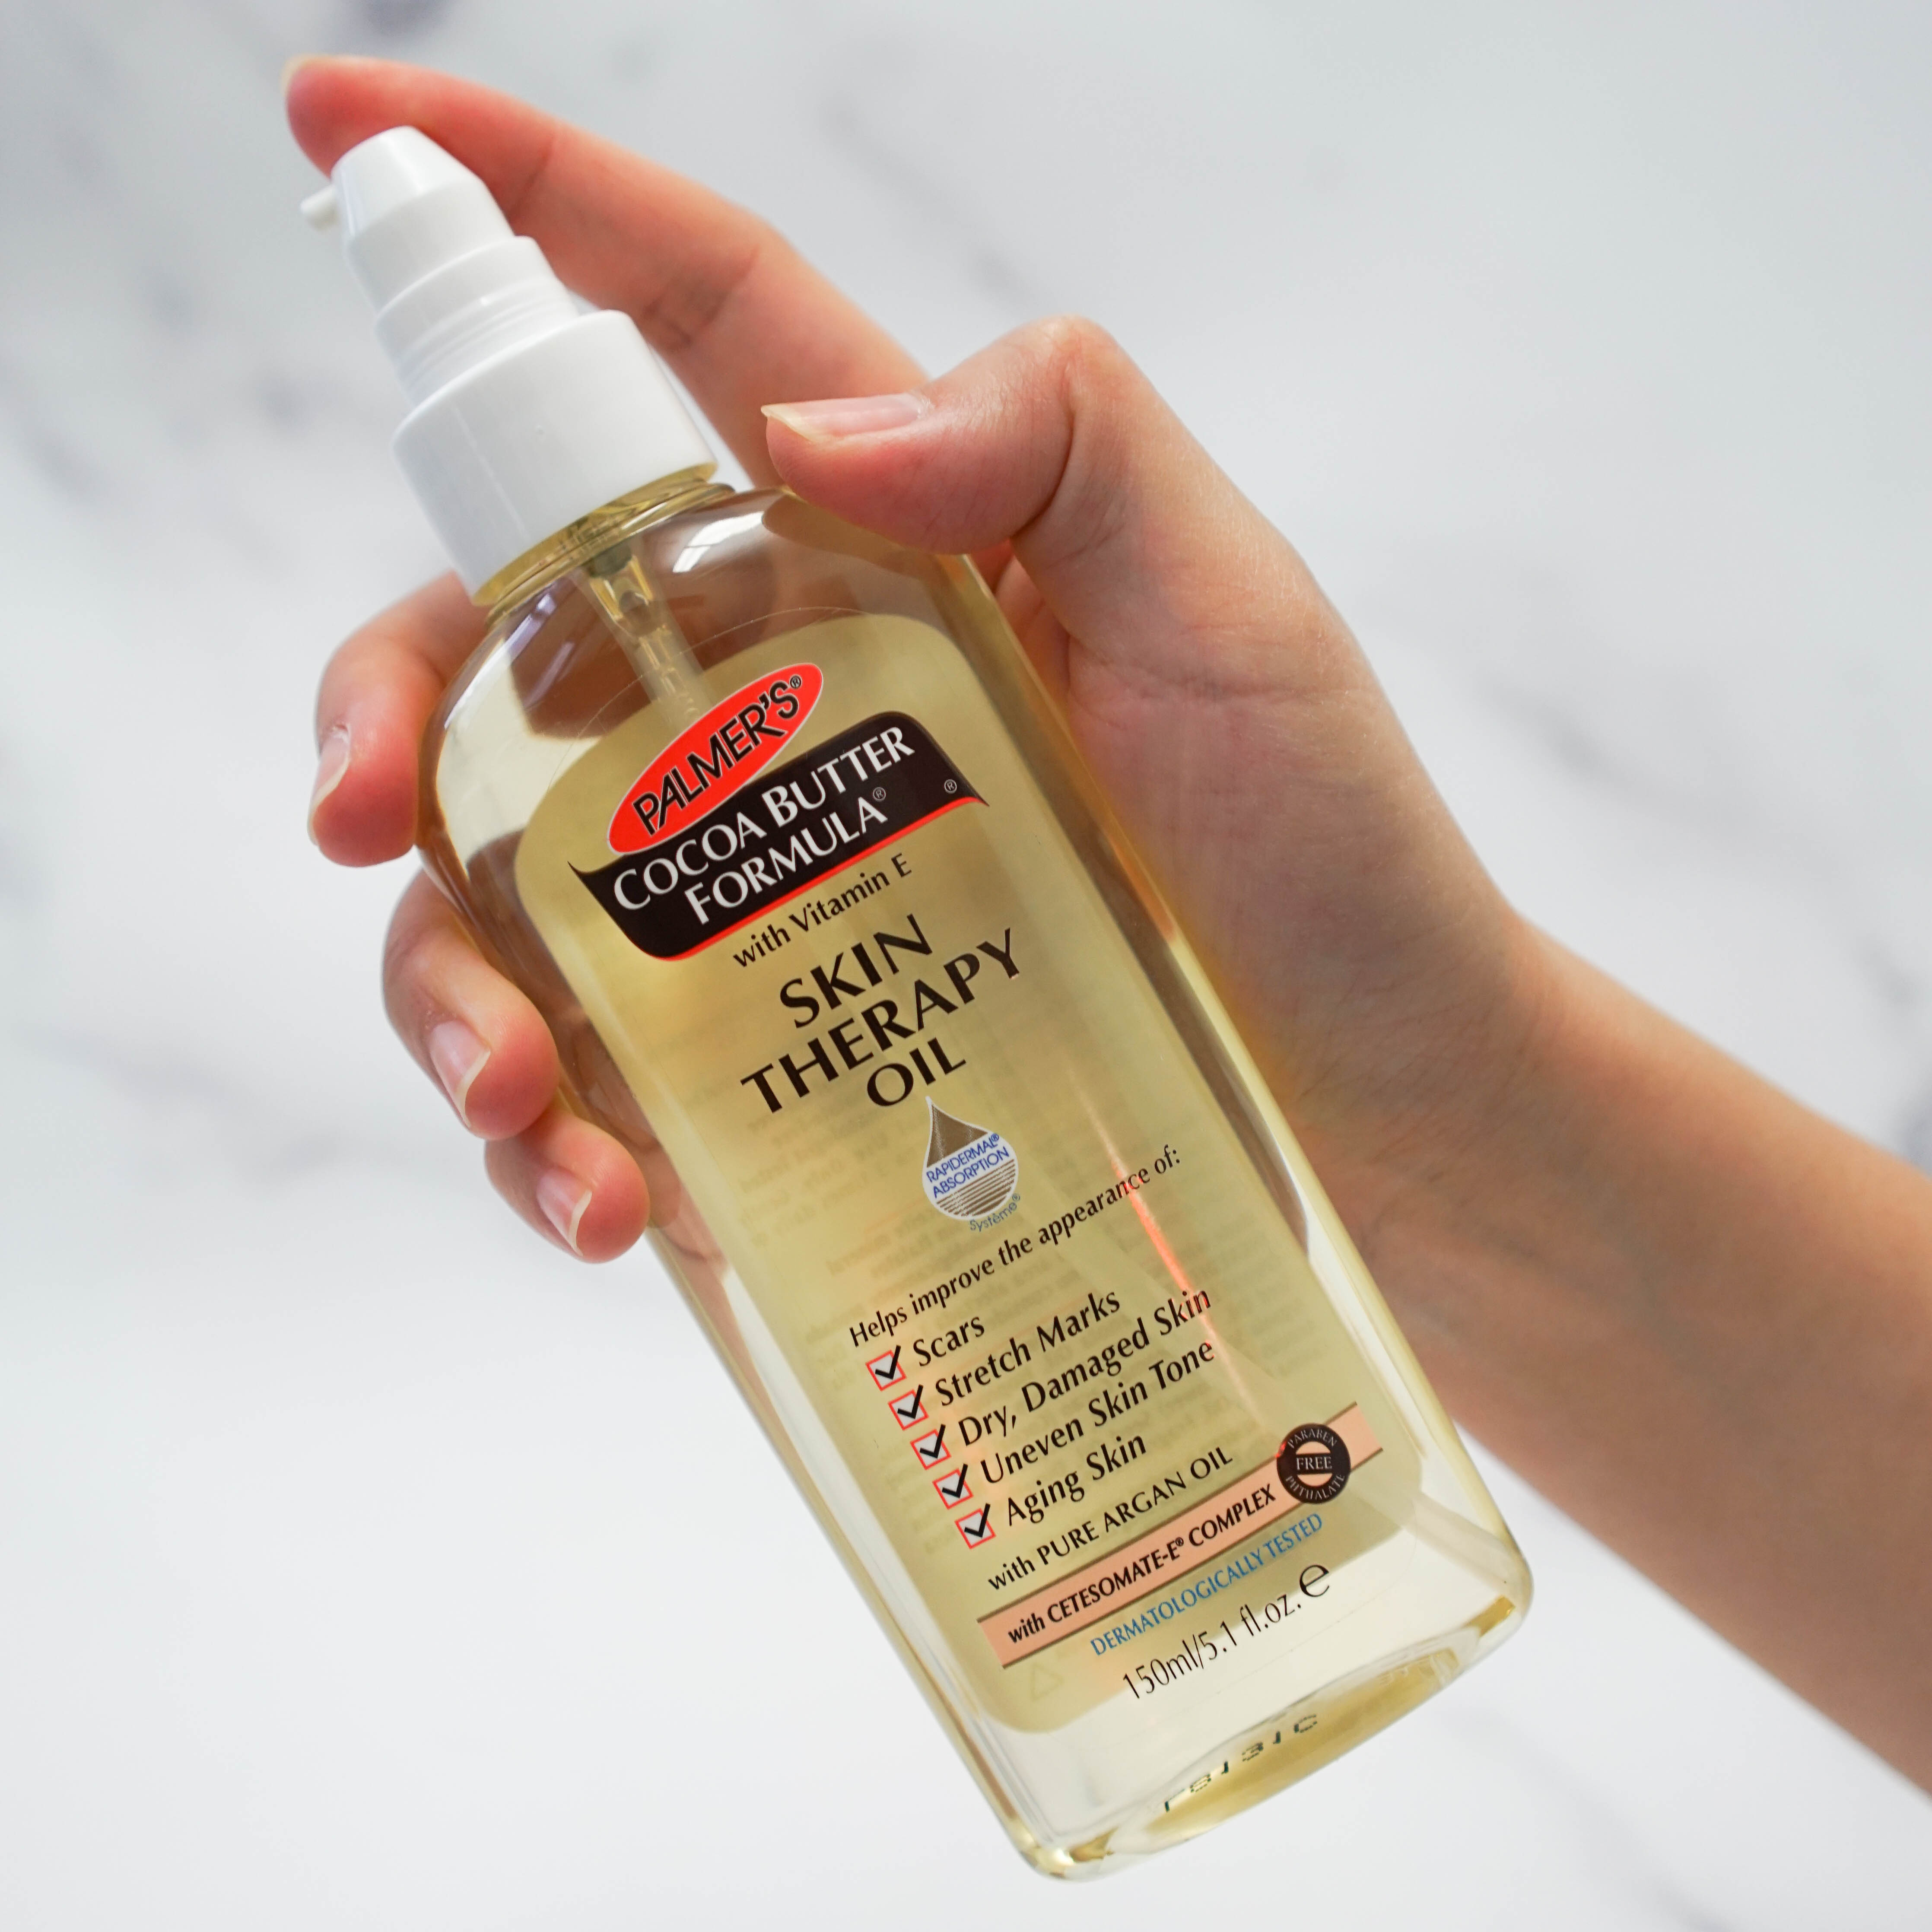 Palmer's Cocoa Butter Formula Skin Therapy Oil in hand